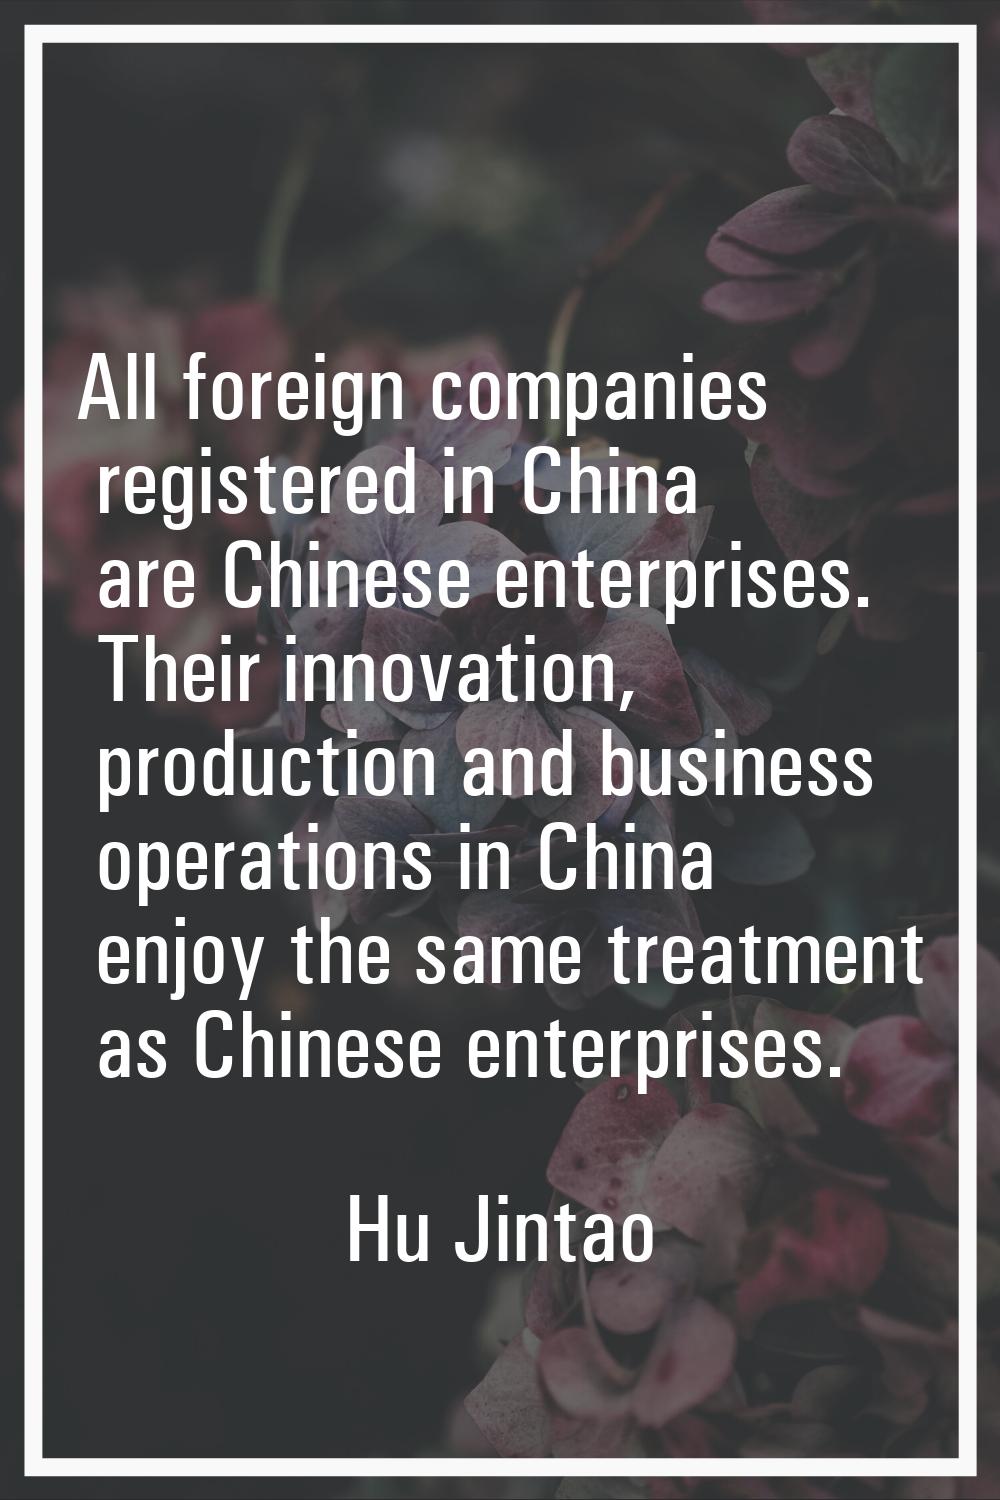 All foreign companies registered in China are Chinese enterprises. Their innovation, production and